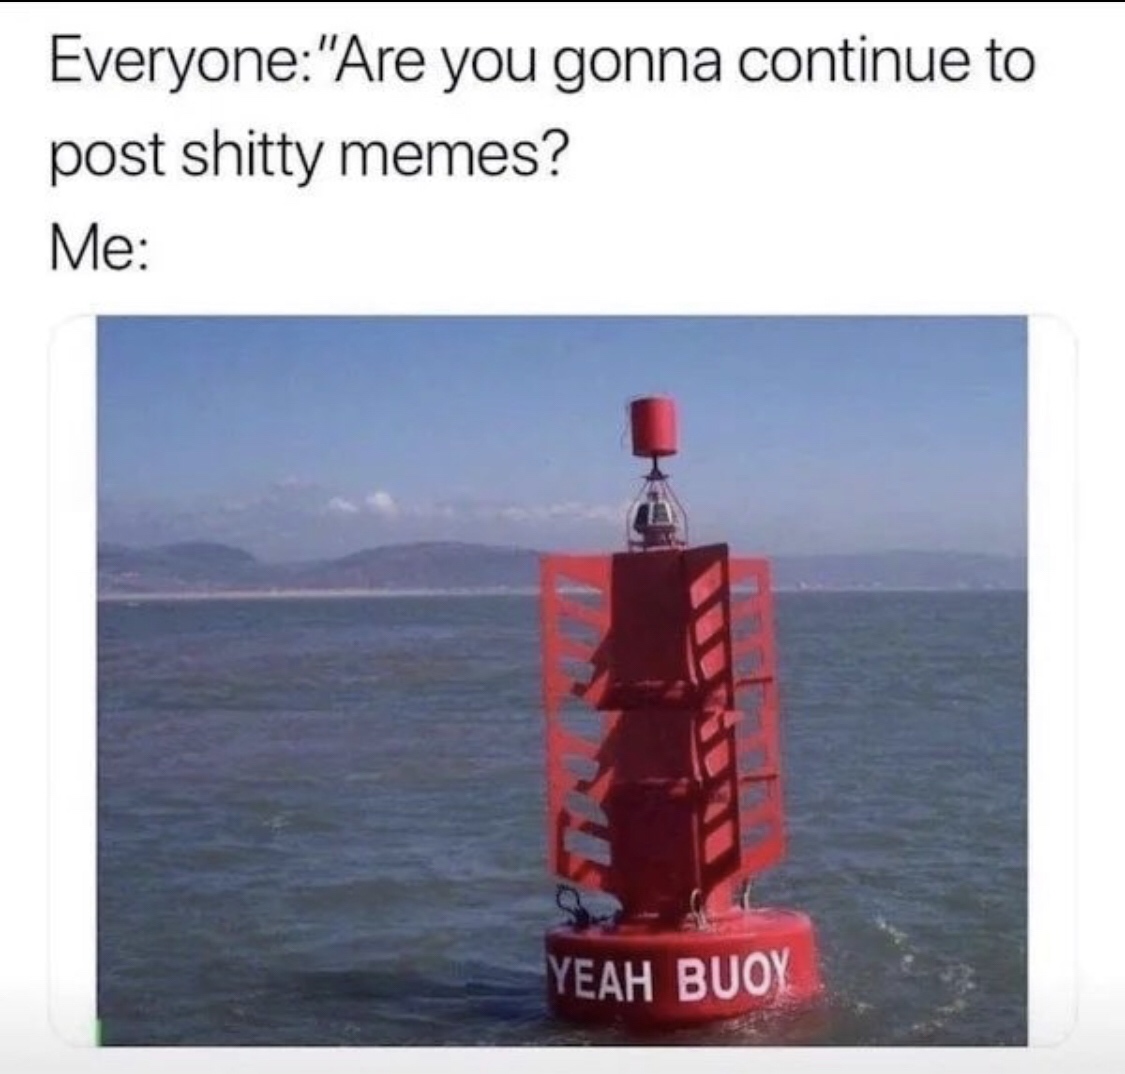 yeah buoy meme - Everyone"Are you gonna continue to post shitty memes? Me Yeah Buoy